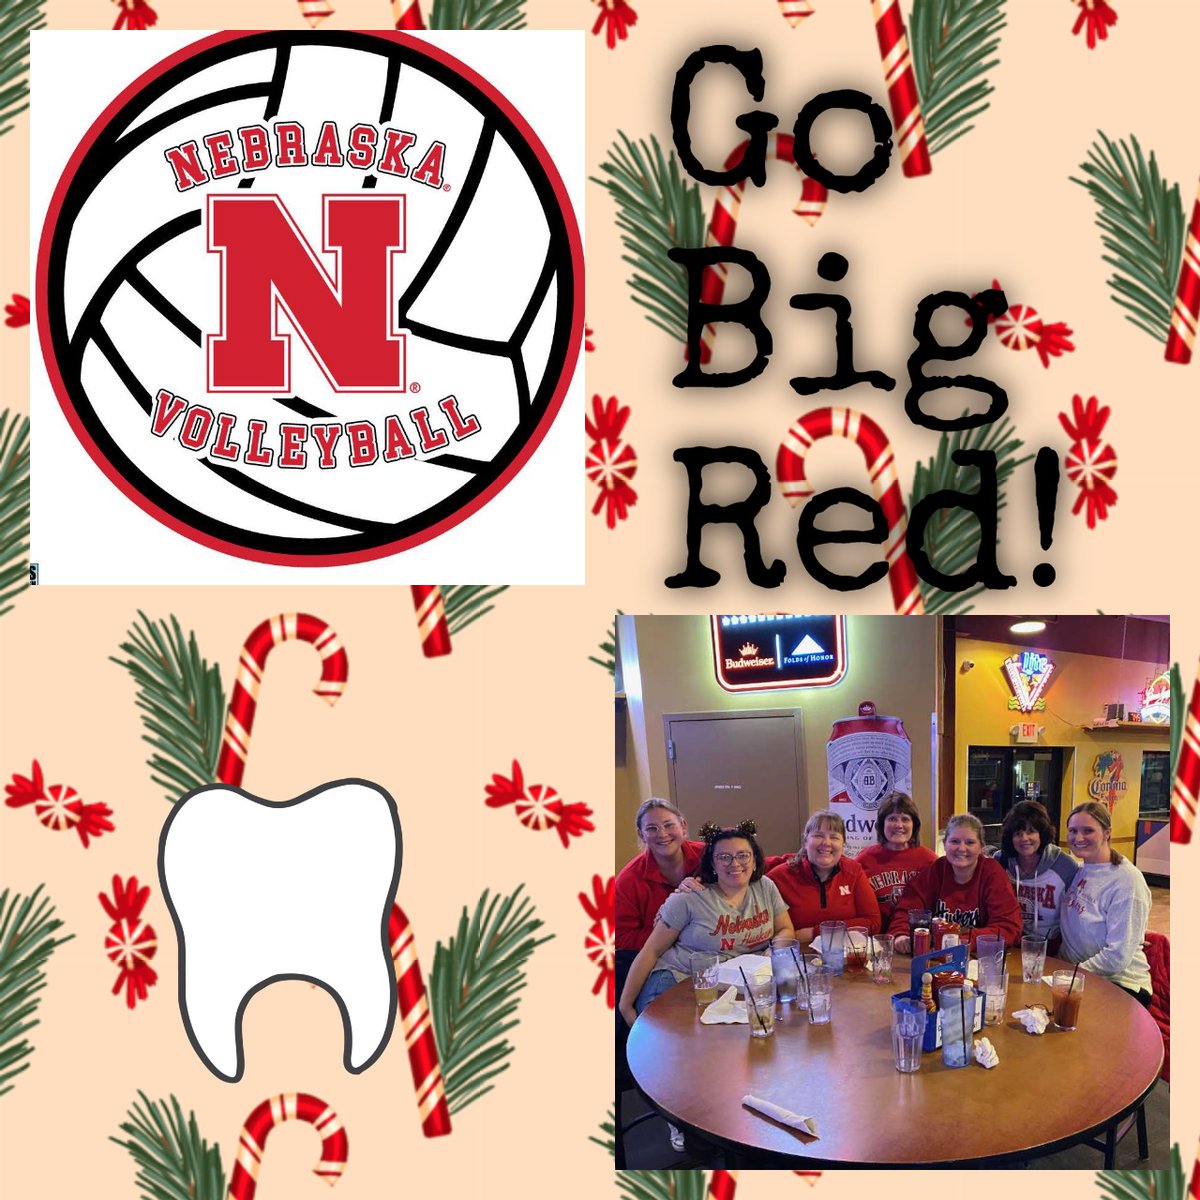 📷📷Go Nebraska Huskers Volleyball! 📷📷
Some of the office was able to get together on Thursday night to cheer on the Huskers!
Comment your score predictions below!
#huskers #huskervolleyball #gbr #gobigred #dentistry #lincoln #dental #dentist #nebraska #nebraskalife